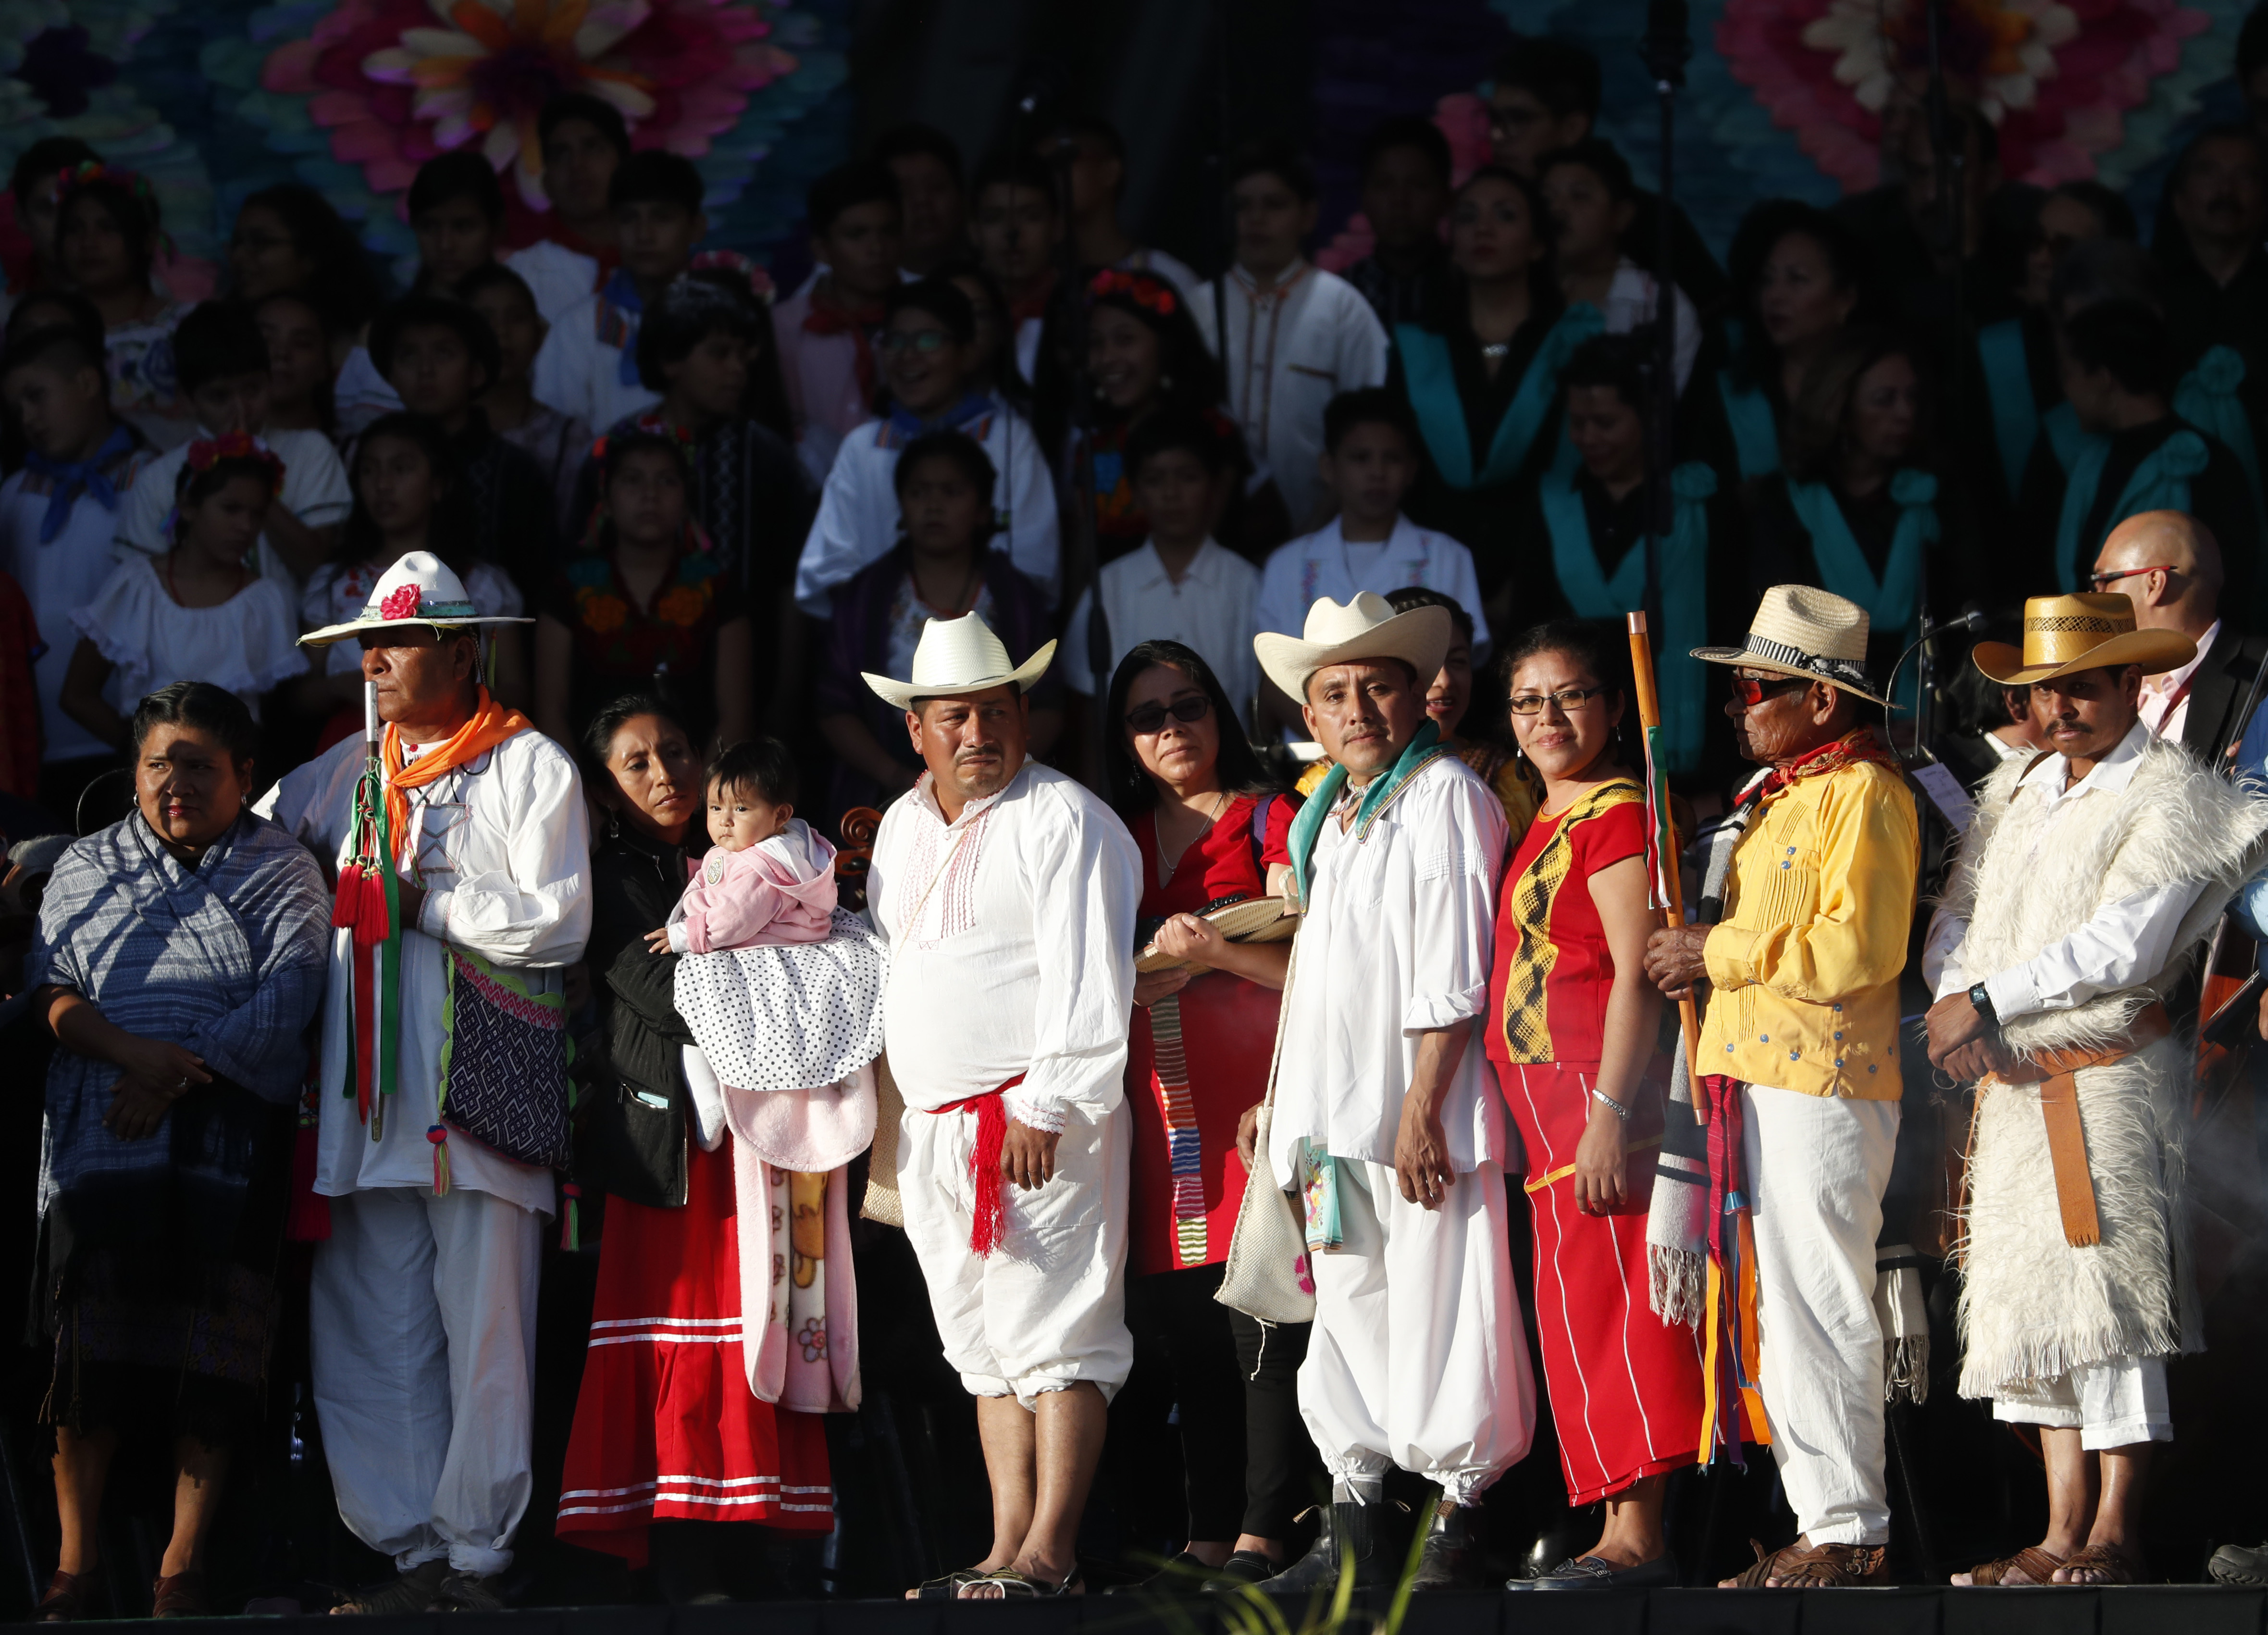 CORRECTS BYLINE - Indigenous religious leaders wait for Mexico's new President Andres Manuel Lopez Obrador for a traditional indigenous ceremony at the Zocalo, in Mexico City, Saturday, Dec. 1, 2018. Mexicans are getting more than just a new president Saturday. The inauguration of Lopez Obrador will mark a turning point in one of the world's most radical experiments in opening markets and privatization. (AP Photo/Moises Castillo)